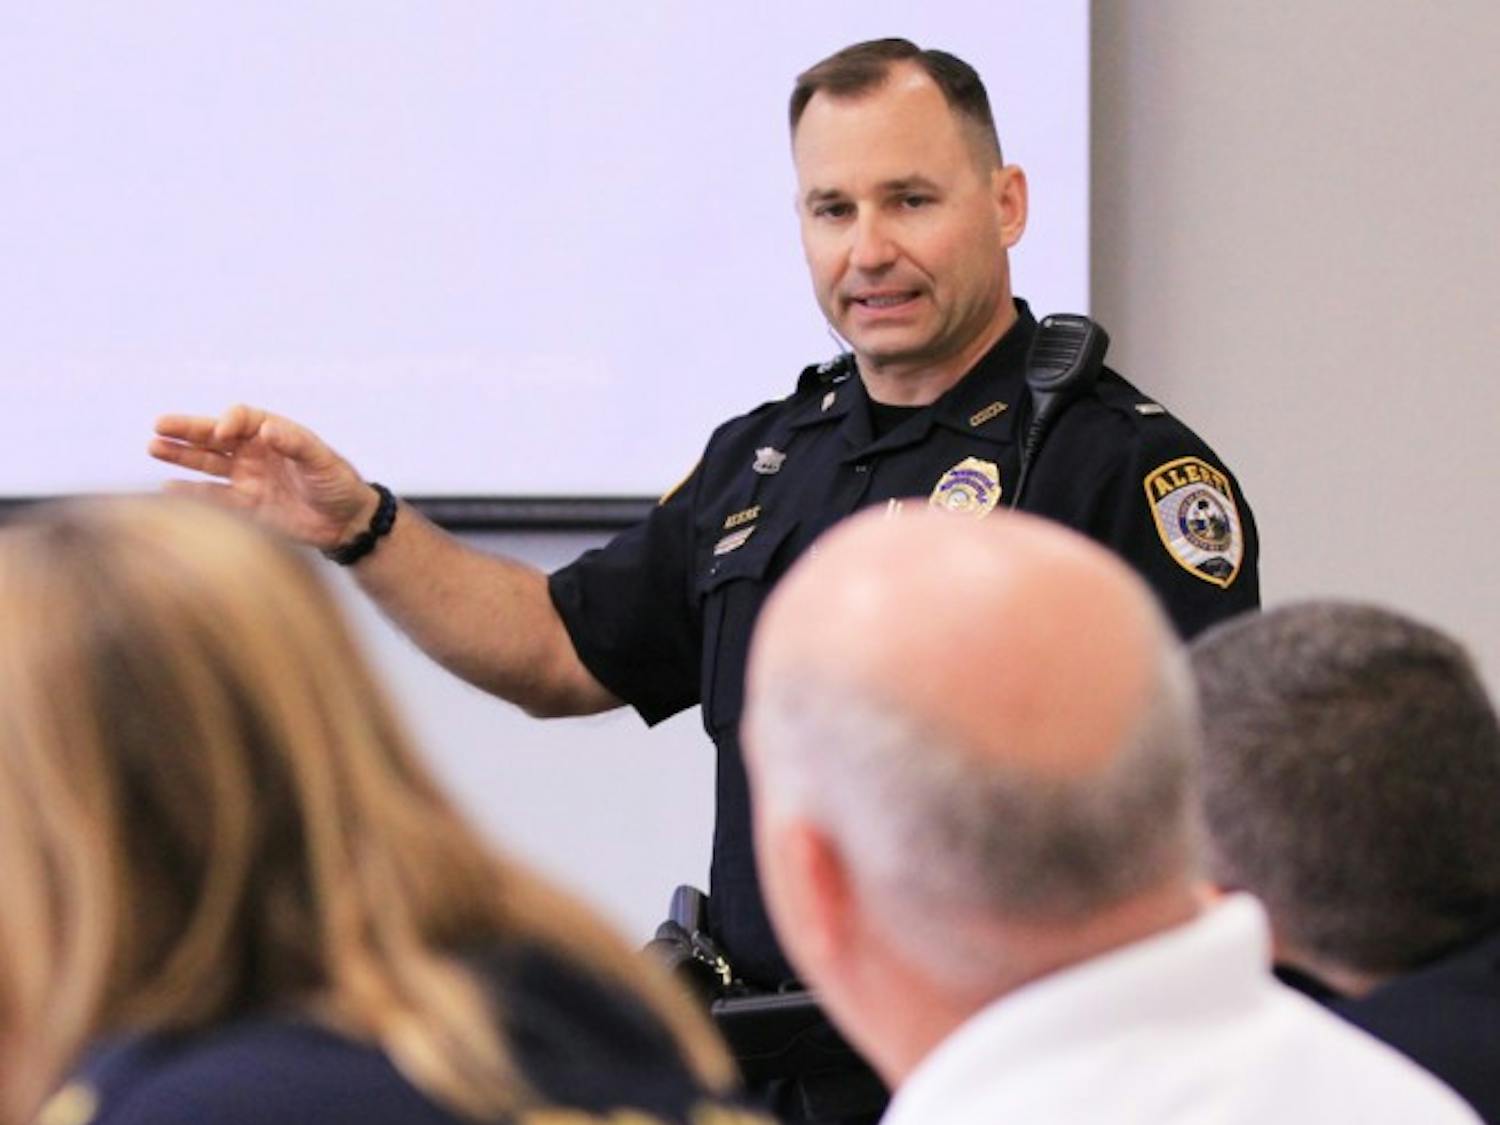 GPD Lt. Brian Helmerson speaks to the Community Alcohol Coalition at Emerson Alumni Hall on Wednesday morning.